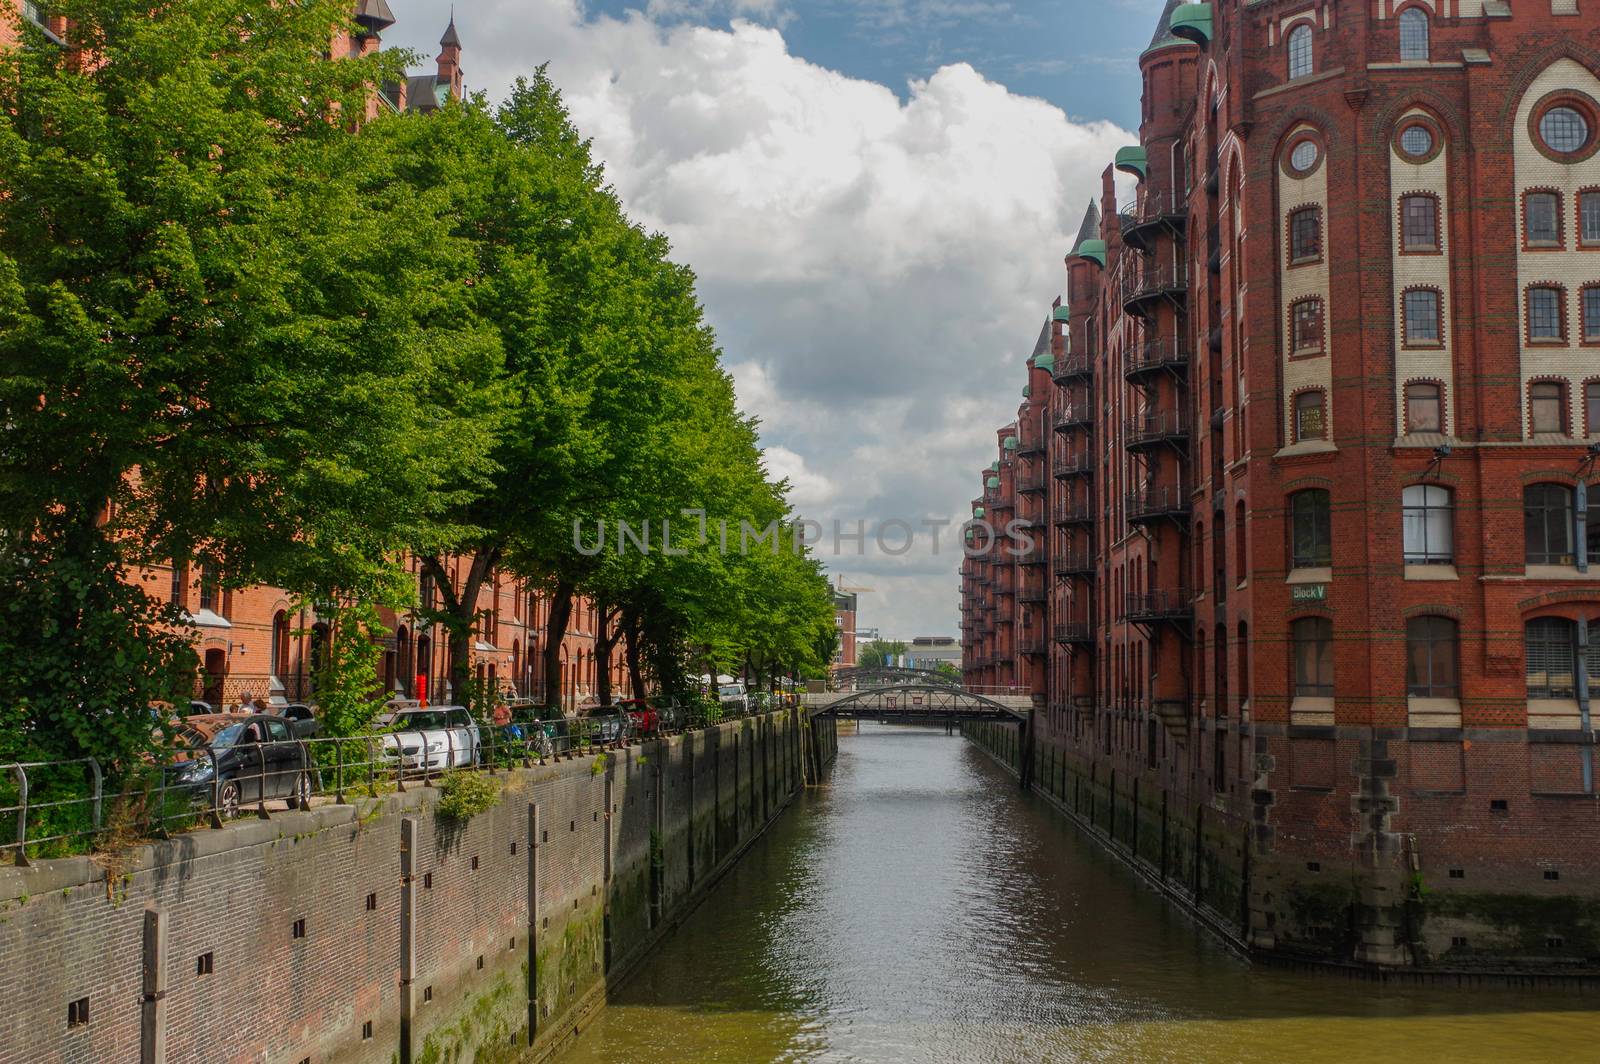 HAMBURG, GERMANY - JULY 18, 2015: the canal of Historic Speicherstadt houses and bridges at evening with amaising skyview over warehouses, famous place Elbe river. by evolutionnow